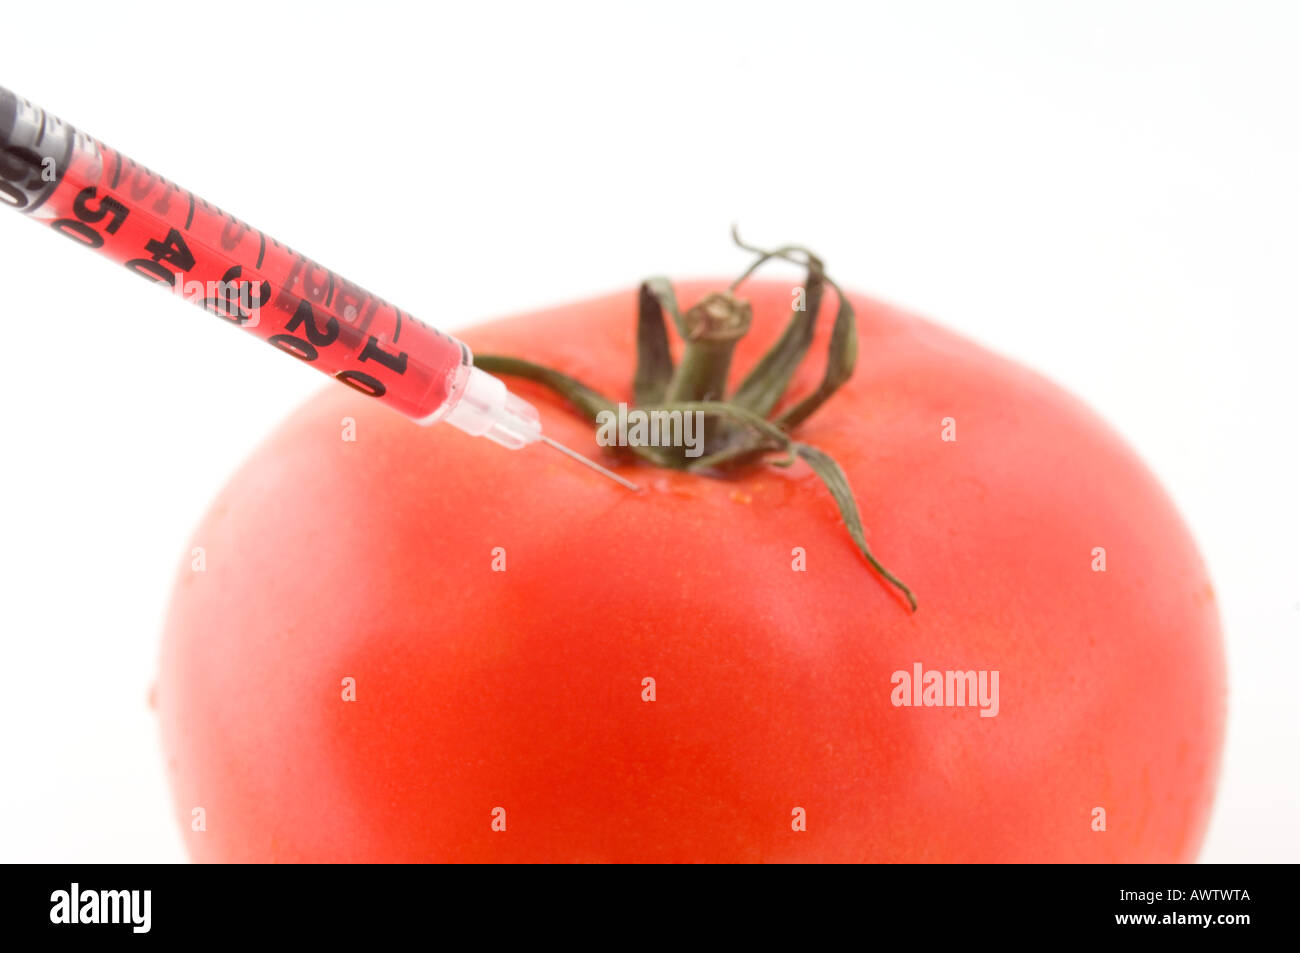 tomato with a syringe GM food Stock Photo